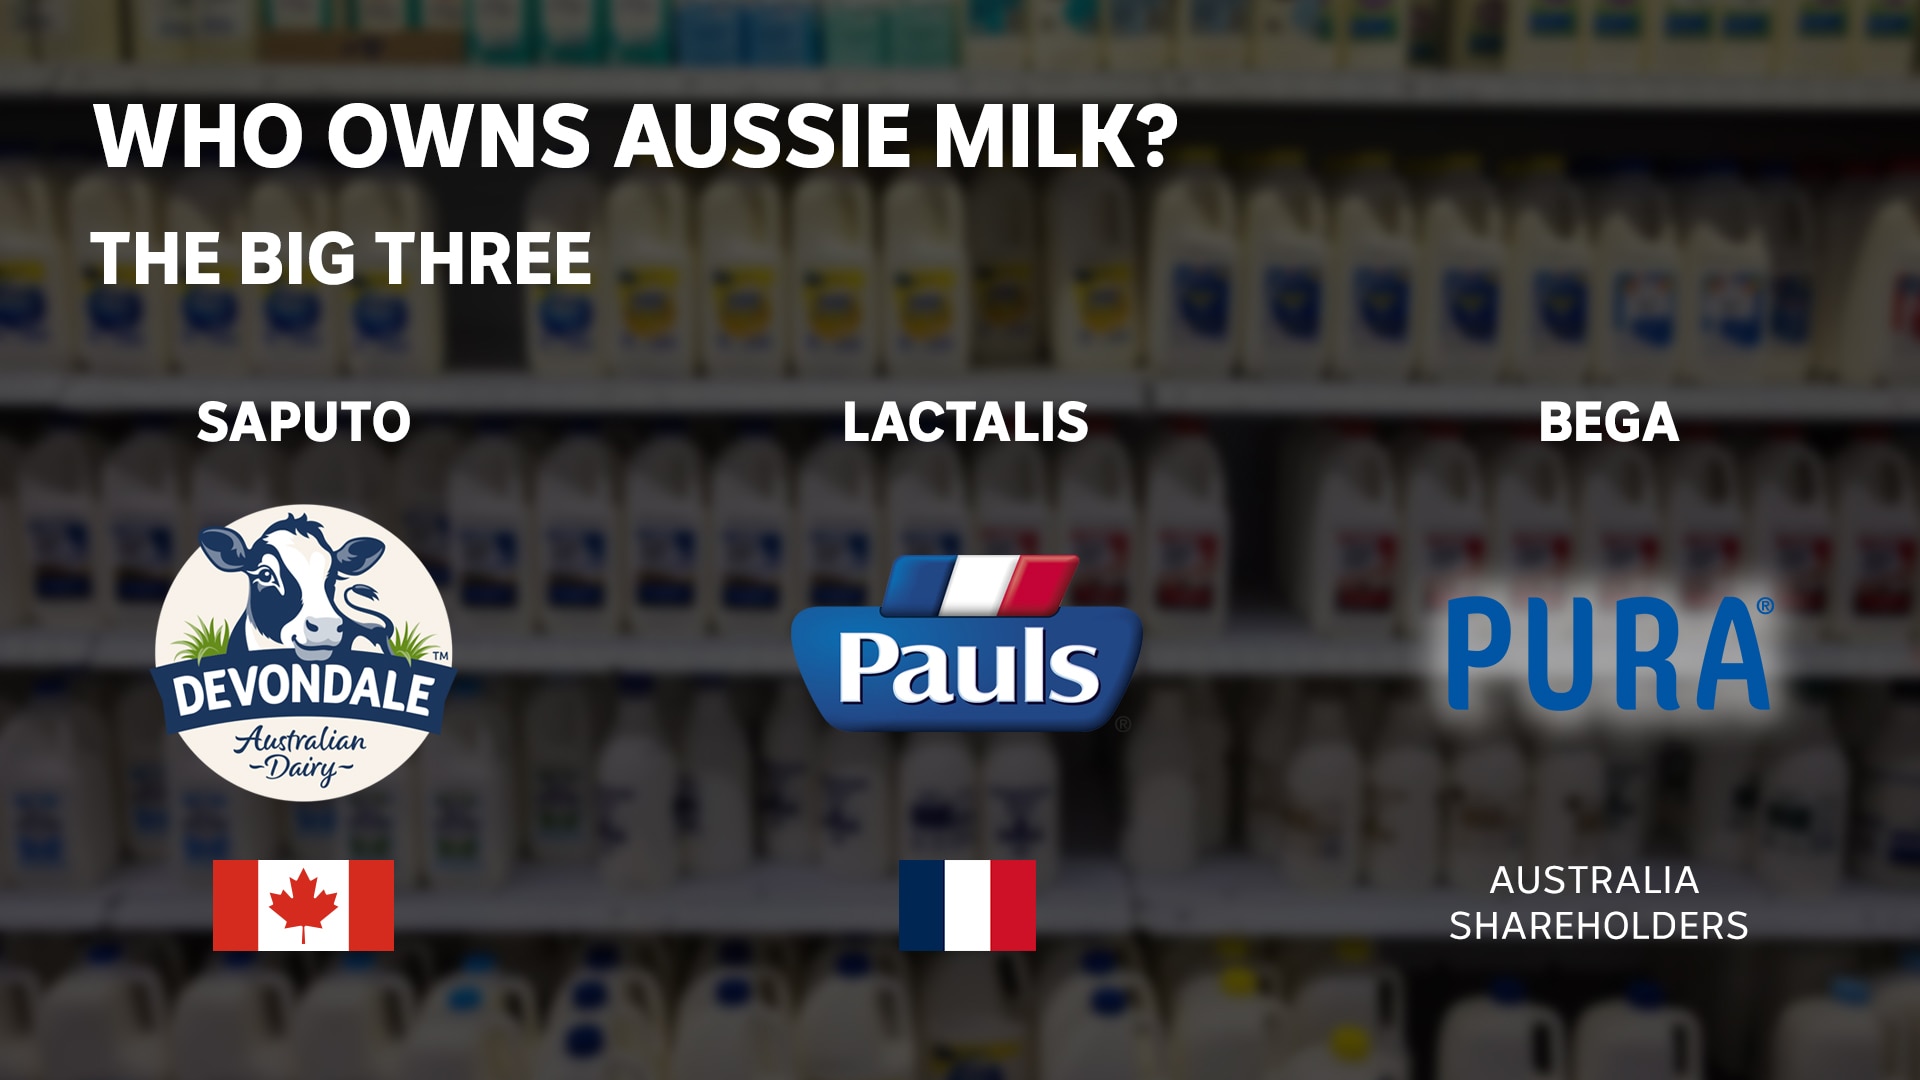 A graphic with three logos it says "The big three" with logos for saputo, lactalis, and Bega